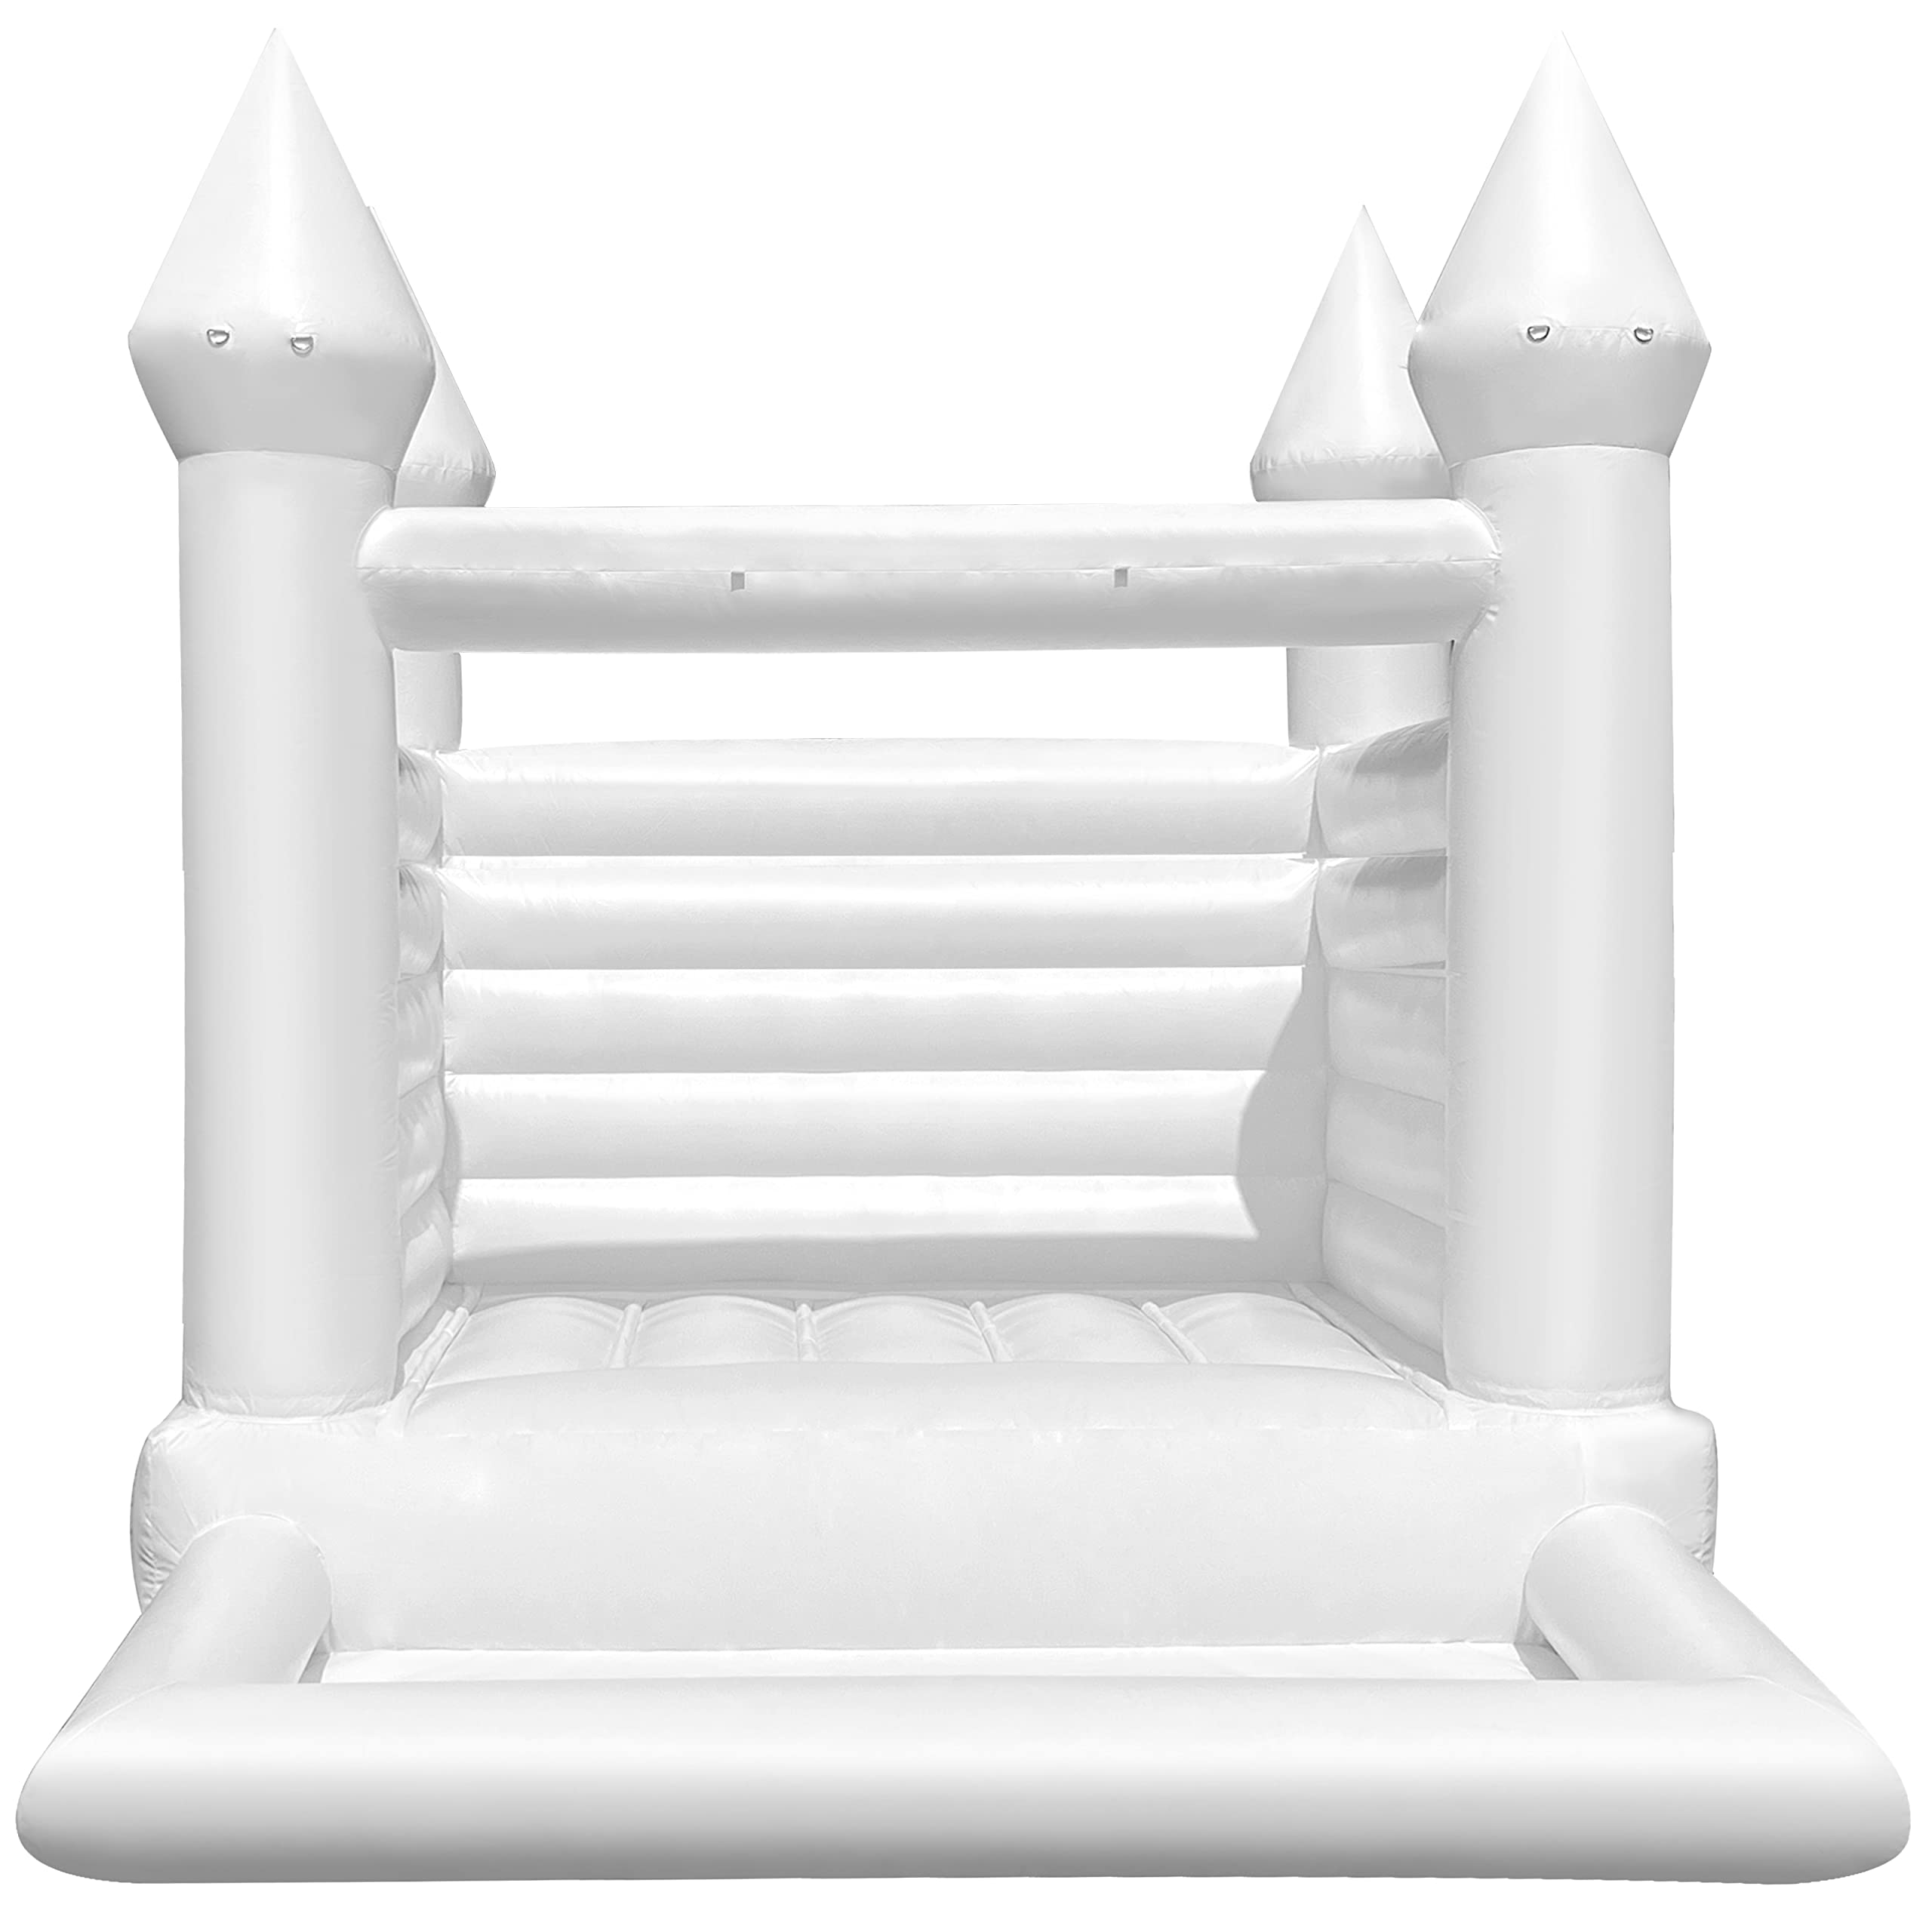 WARSUN Inflatable White Bounce House 12x10x10FT / 3.5x3x3m with Ball Pool&Blower All PVC Inflatable Jumper Bouncy Castle More Durable Bounce House Castle for Kids Birthday Wedding Party Business Photography